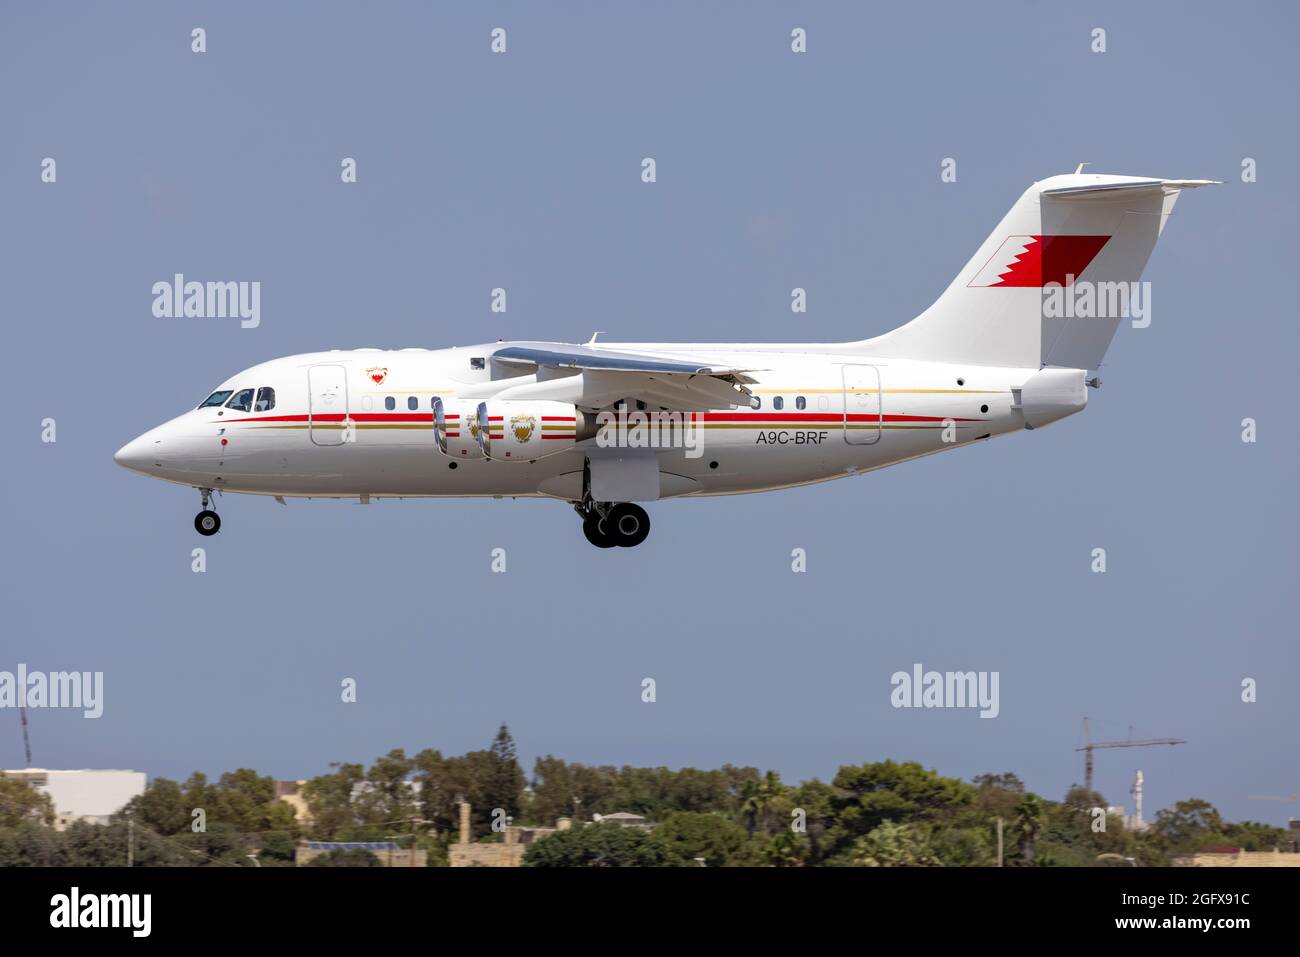 Bahrain Air Force British Aerospace Avro 146-RJ70 (Reg.: A9C-BRF) arriving fresh from a new paint job in Norwich, UK. Stock Photo